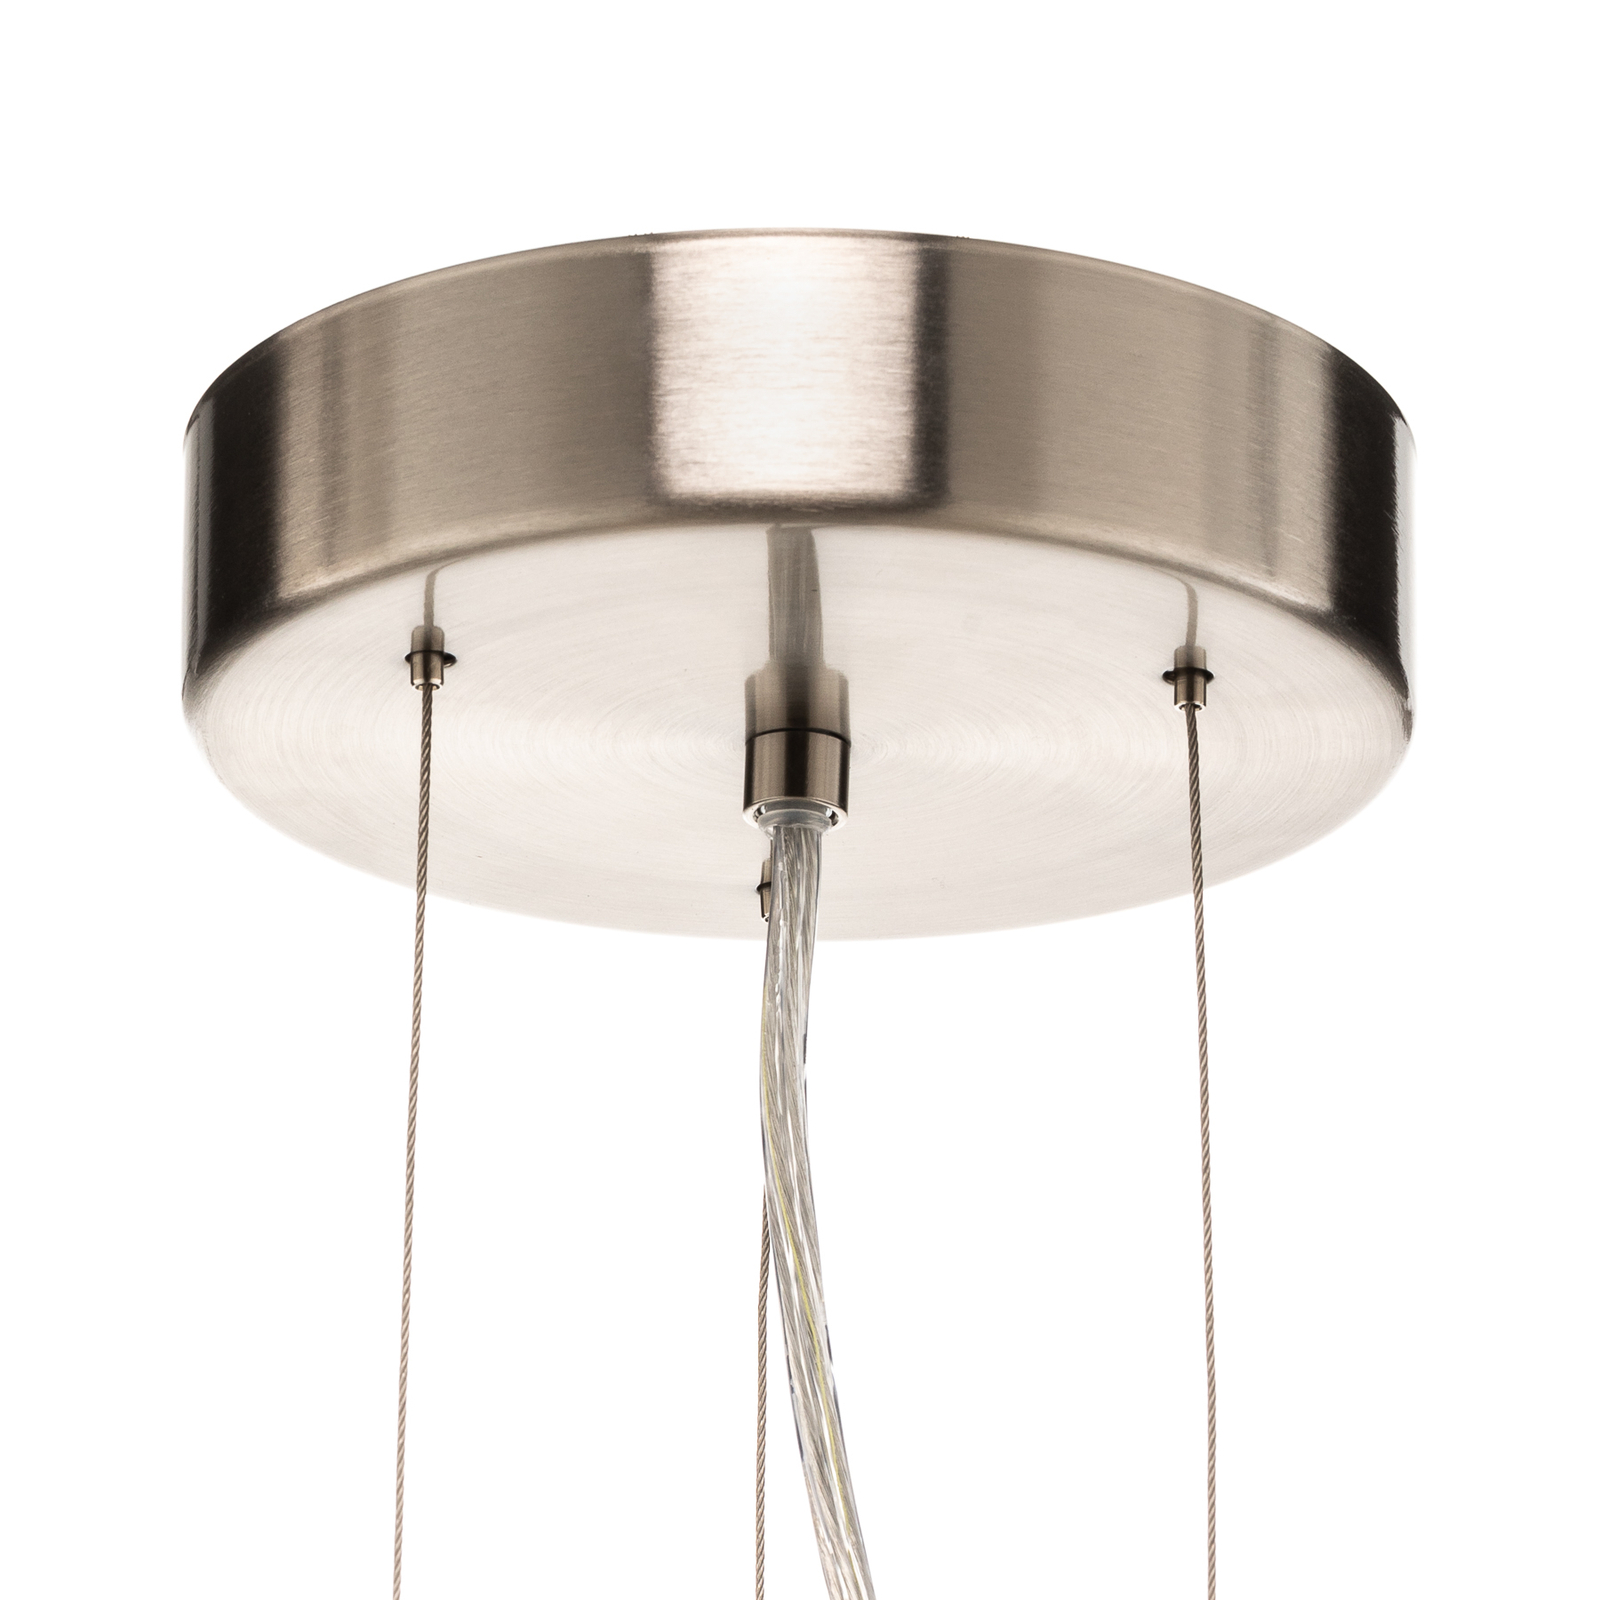 Maserlo pendant light round, taupe and gold